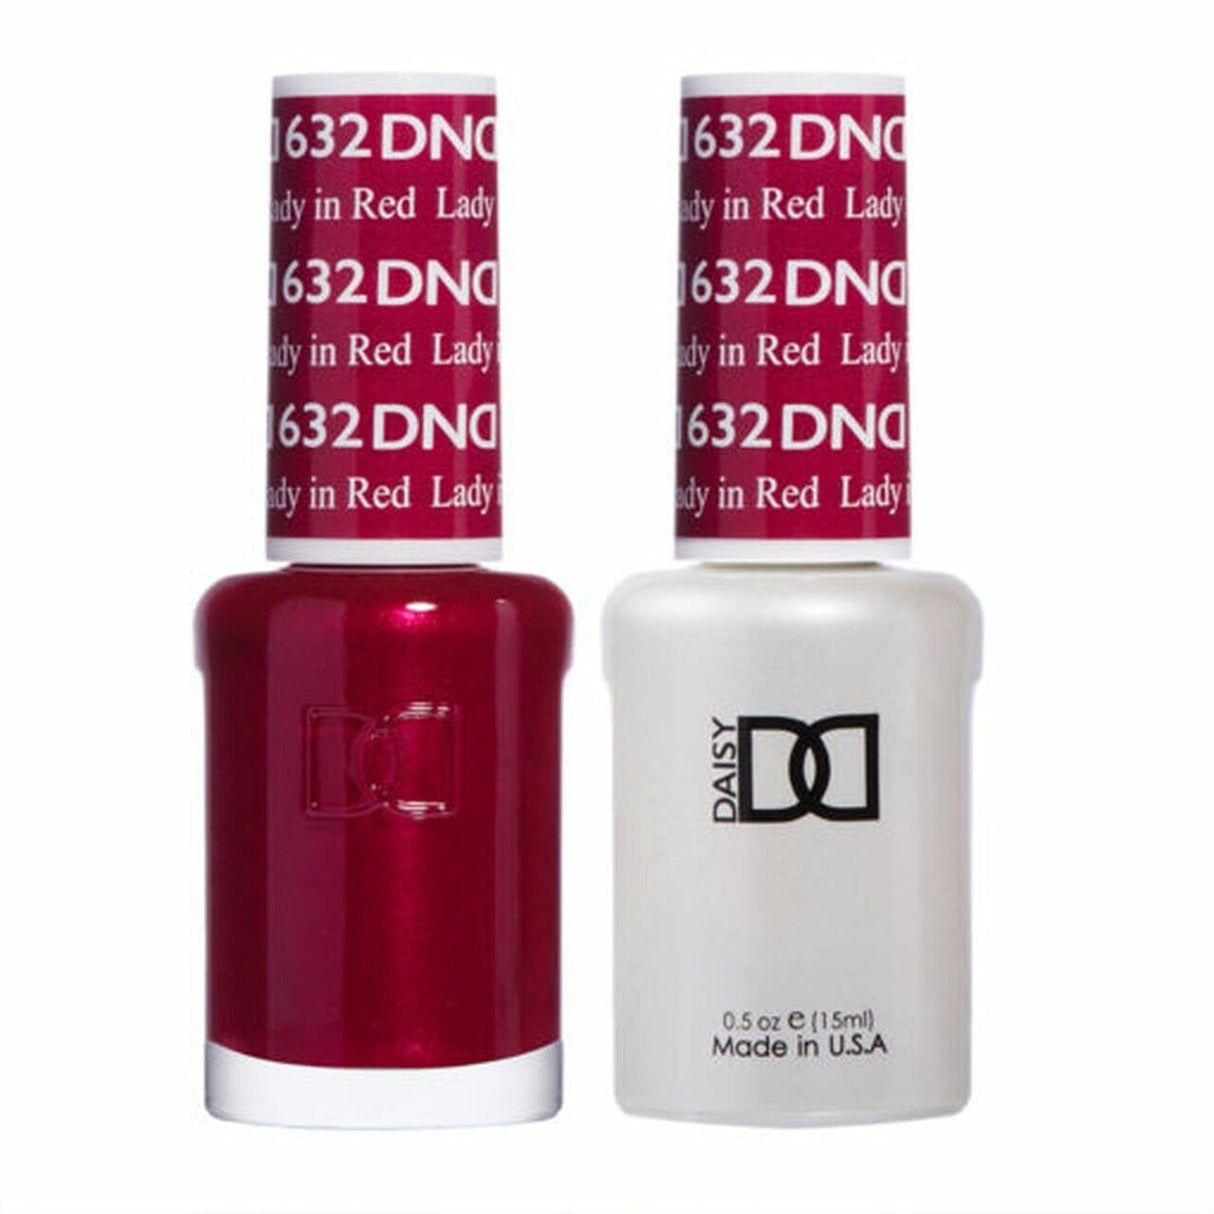 DND Duo Gel Matching Color - 632 Lady in Red - Jessica Nail & Beauty Supply - Canada Nail Beauty Supply - DND DUO